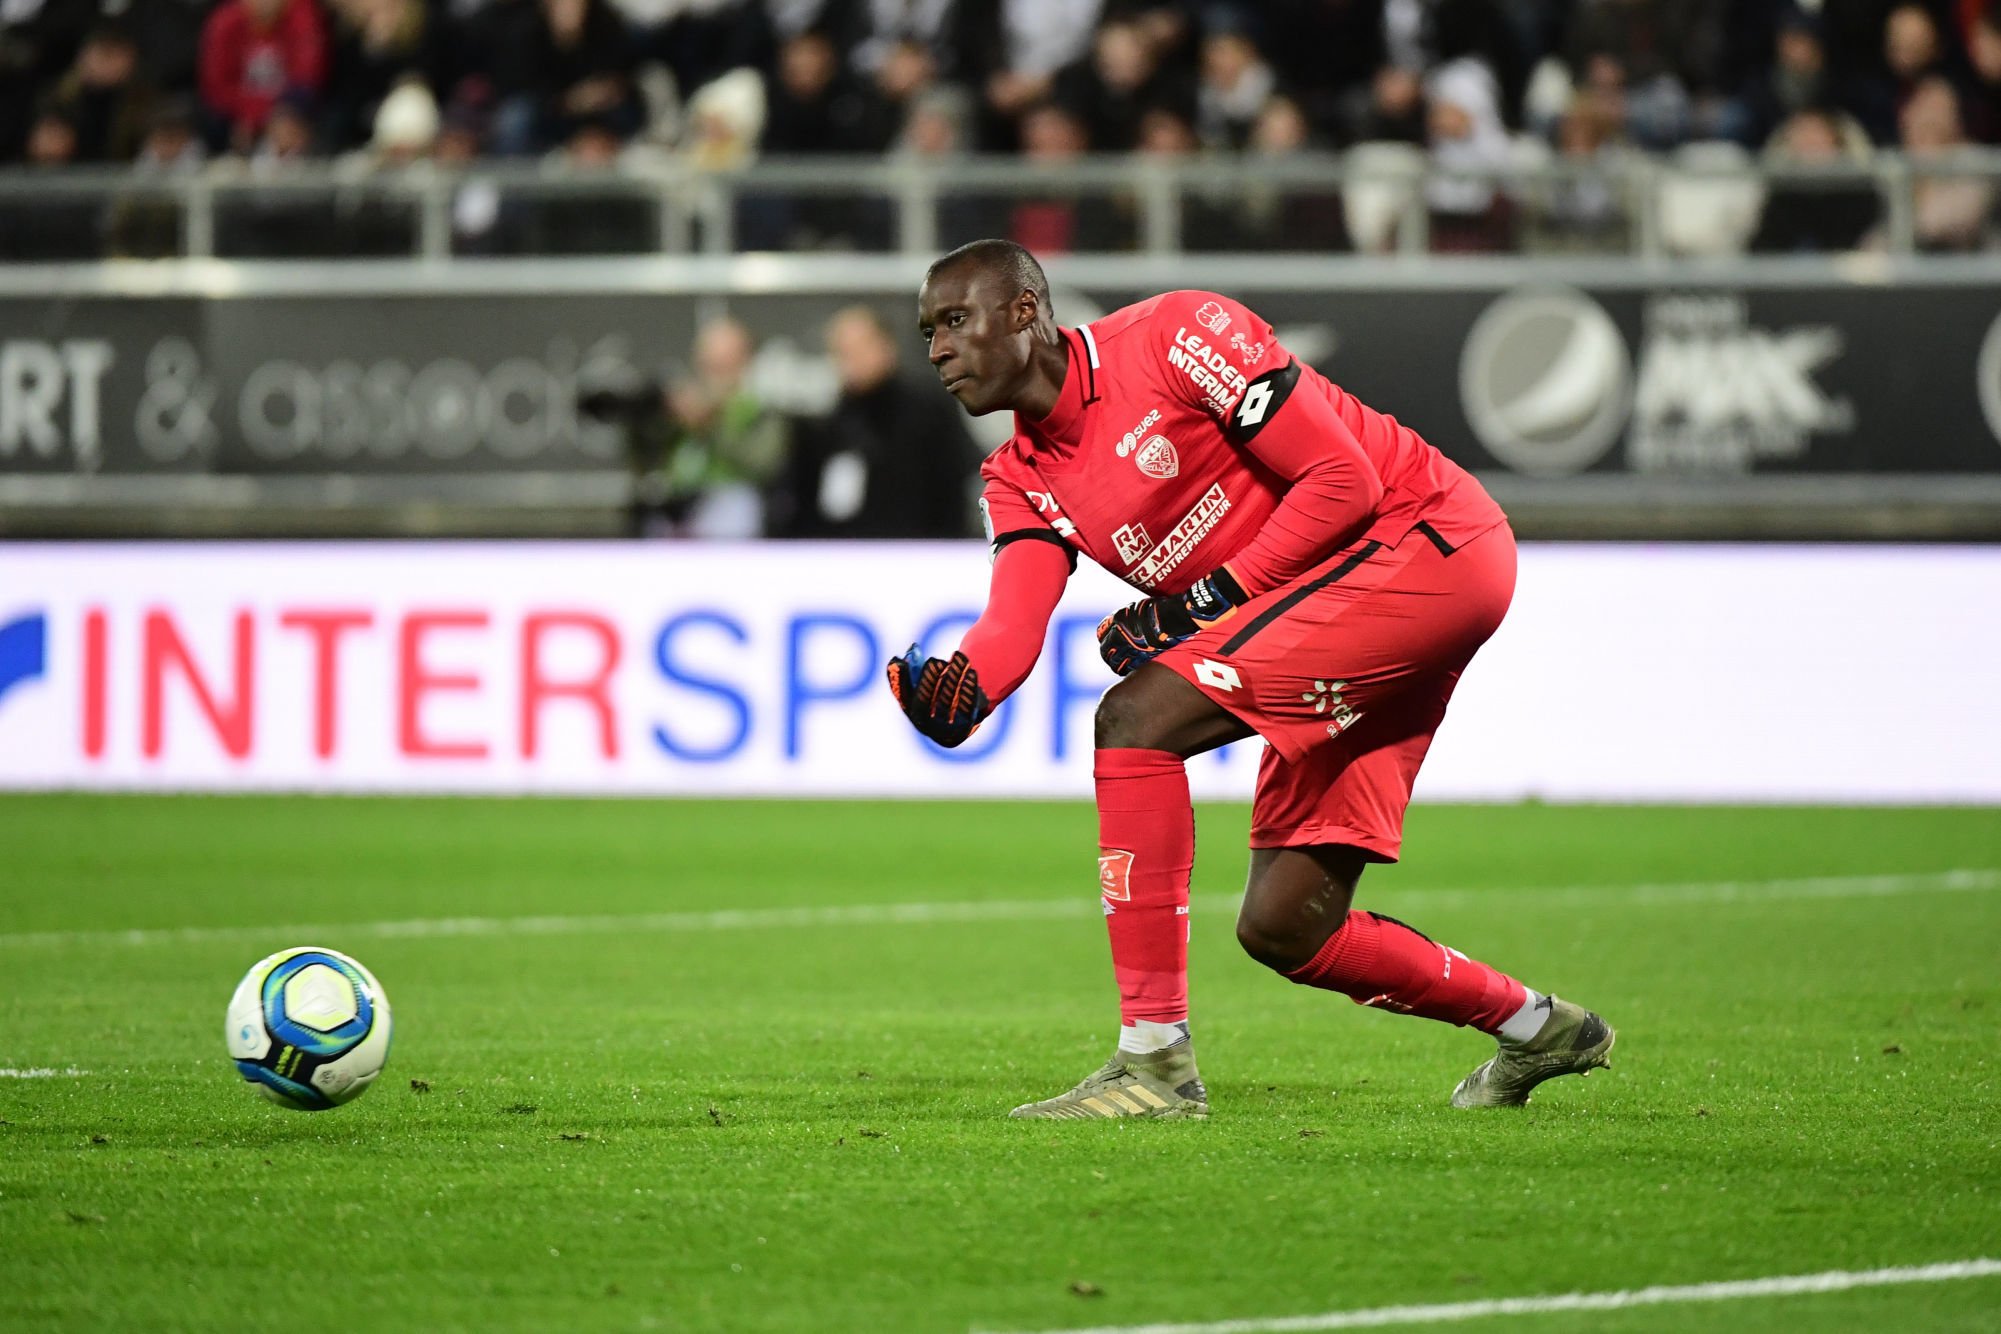 Alfred GOMIS of Dijon during the Ligue 1 match between Amiens and Dijon at Stade de la Licorne on December 14, 2019 in Amiens, France. (Photo by Dave Winter/Icon Sport) - Alfred GOMIS - Stade de la Licorne - Amiens (France)